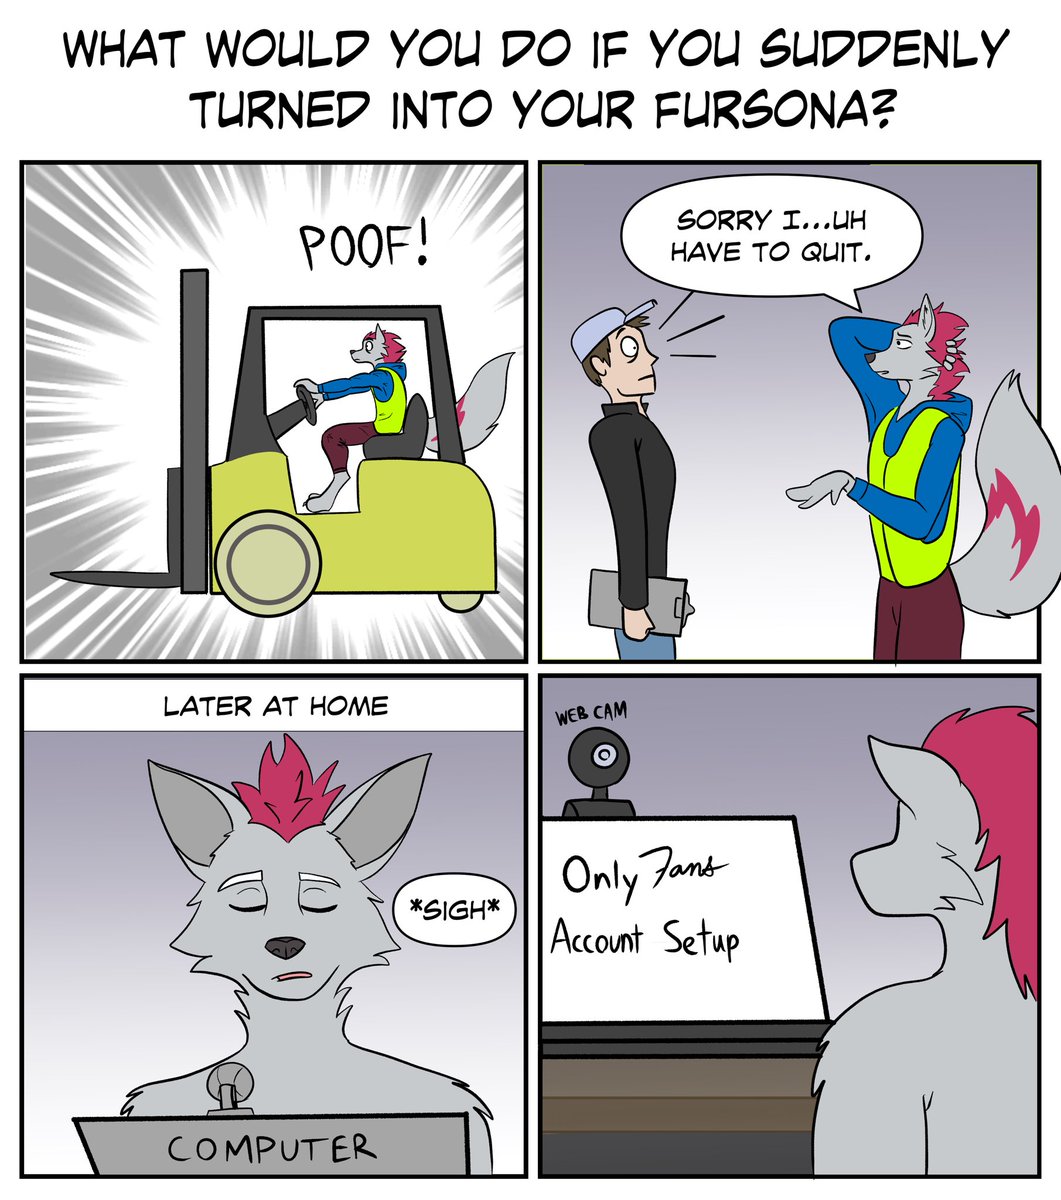 What would you do if you suddenly turned into your fursona?